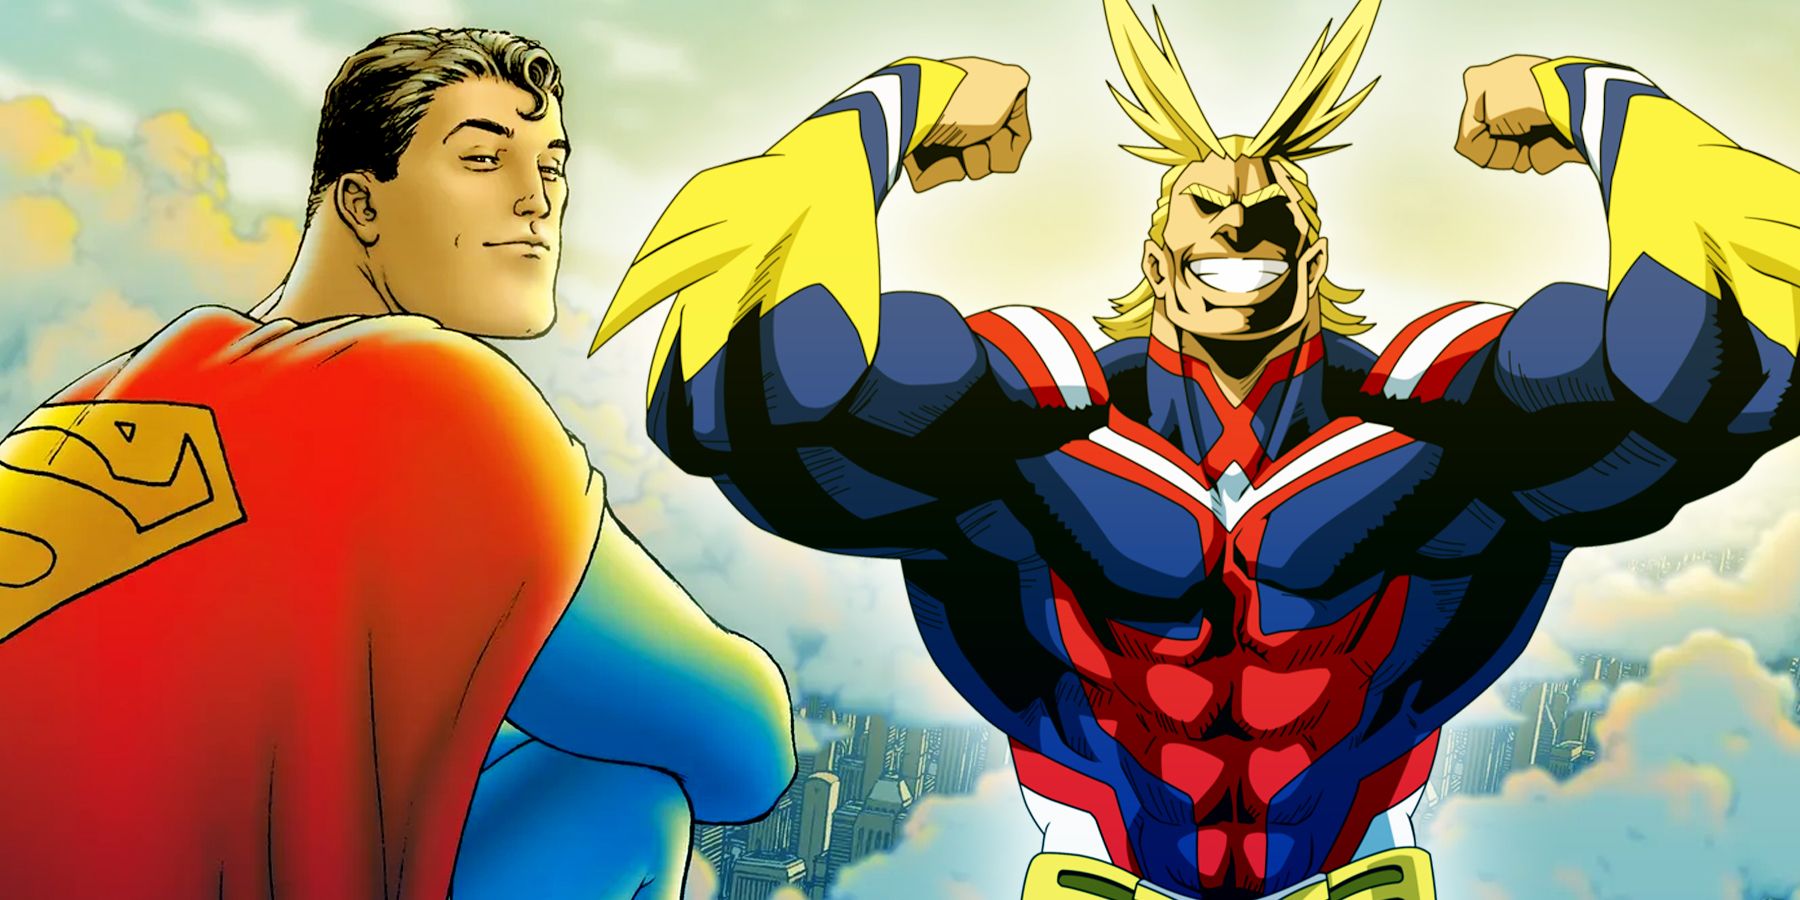 Classic Superman and My Hero Academia's All Might